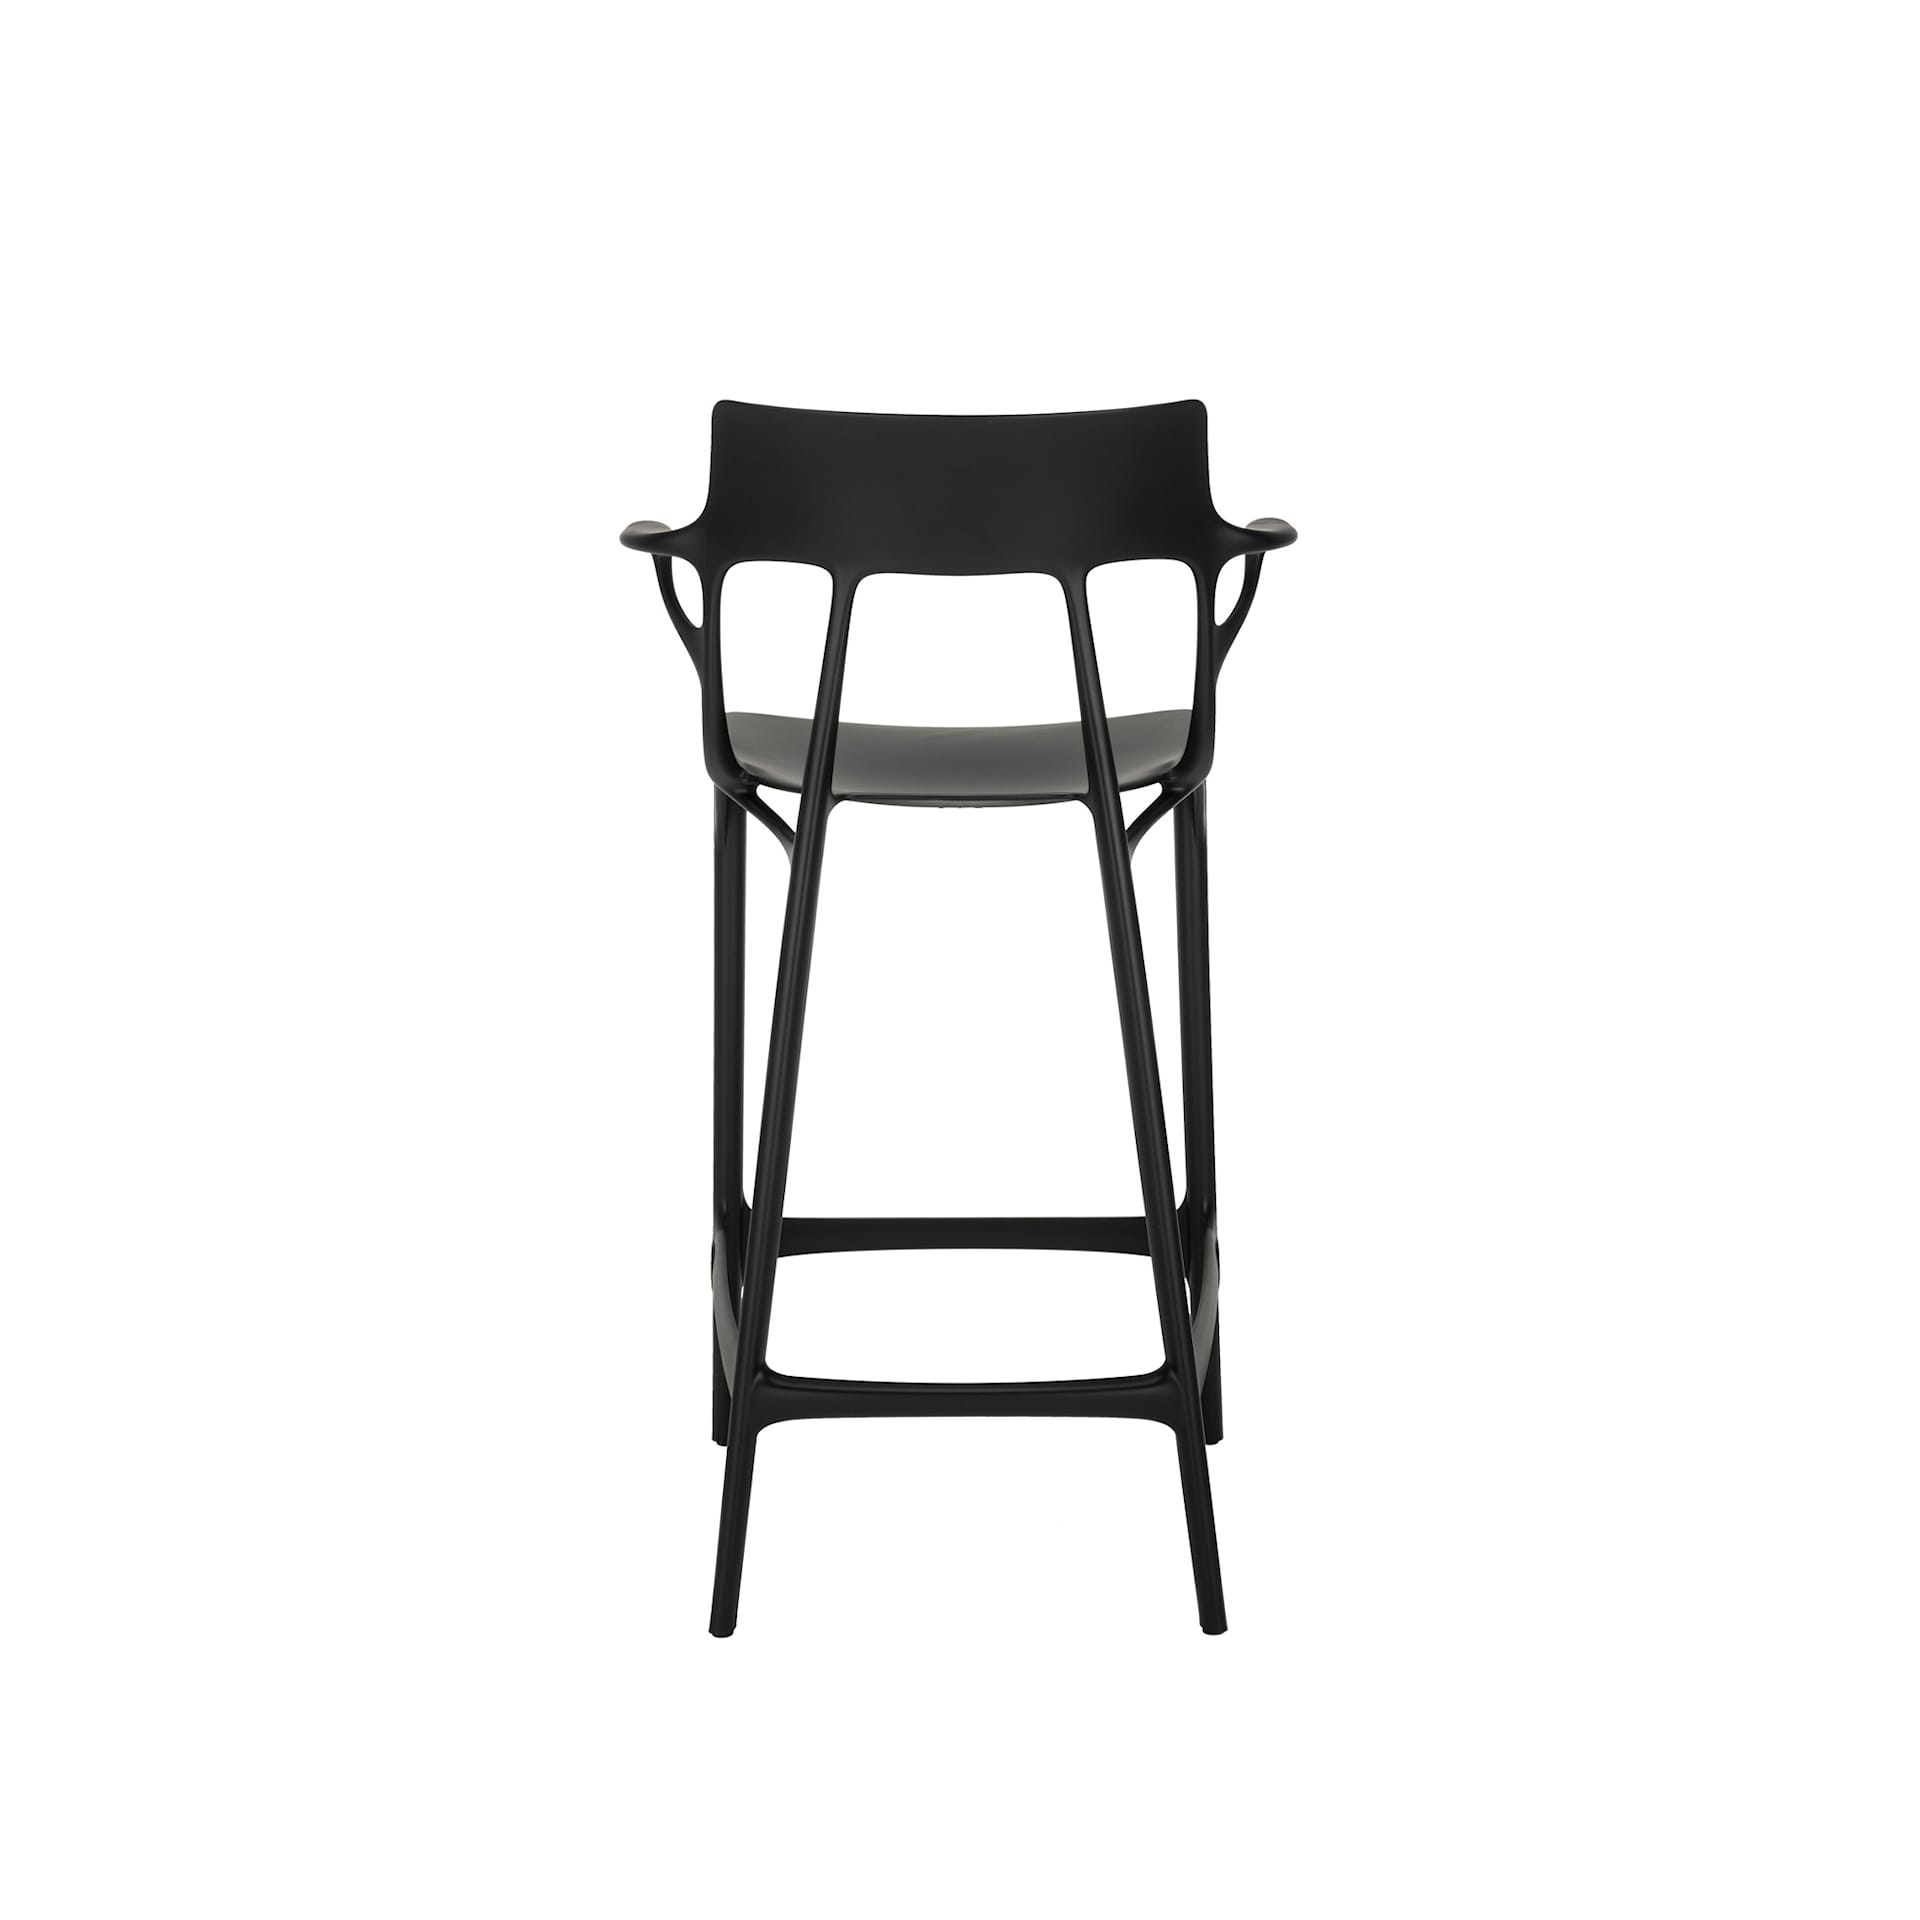 A.I. Stool Recycled - Kartell - Philippe Starck - NO GA